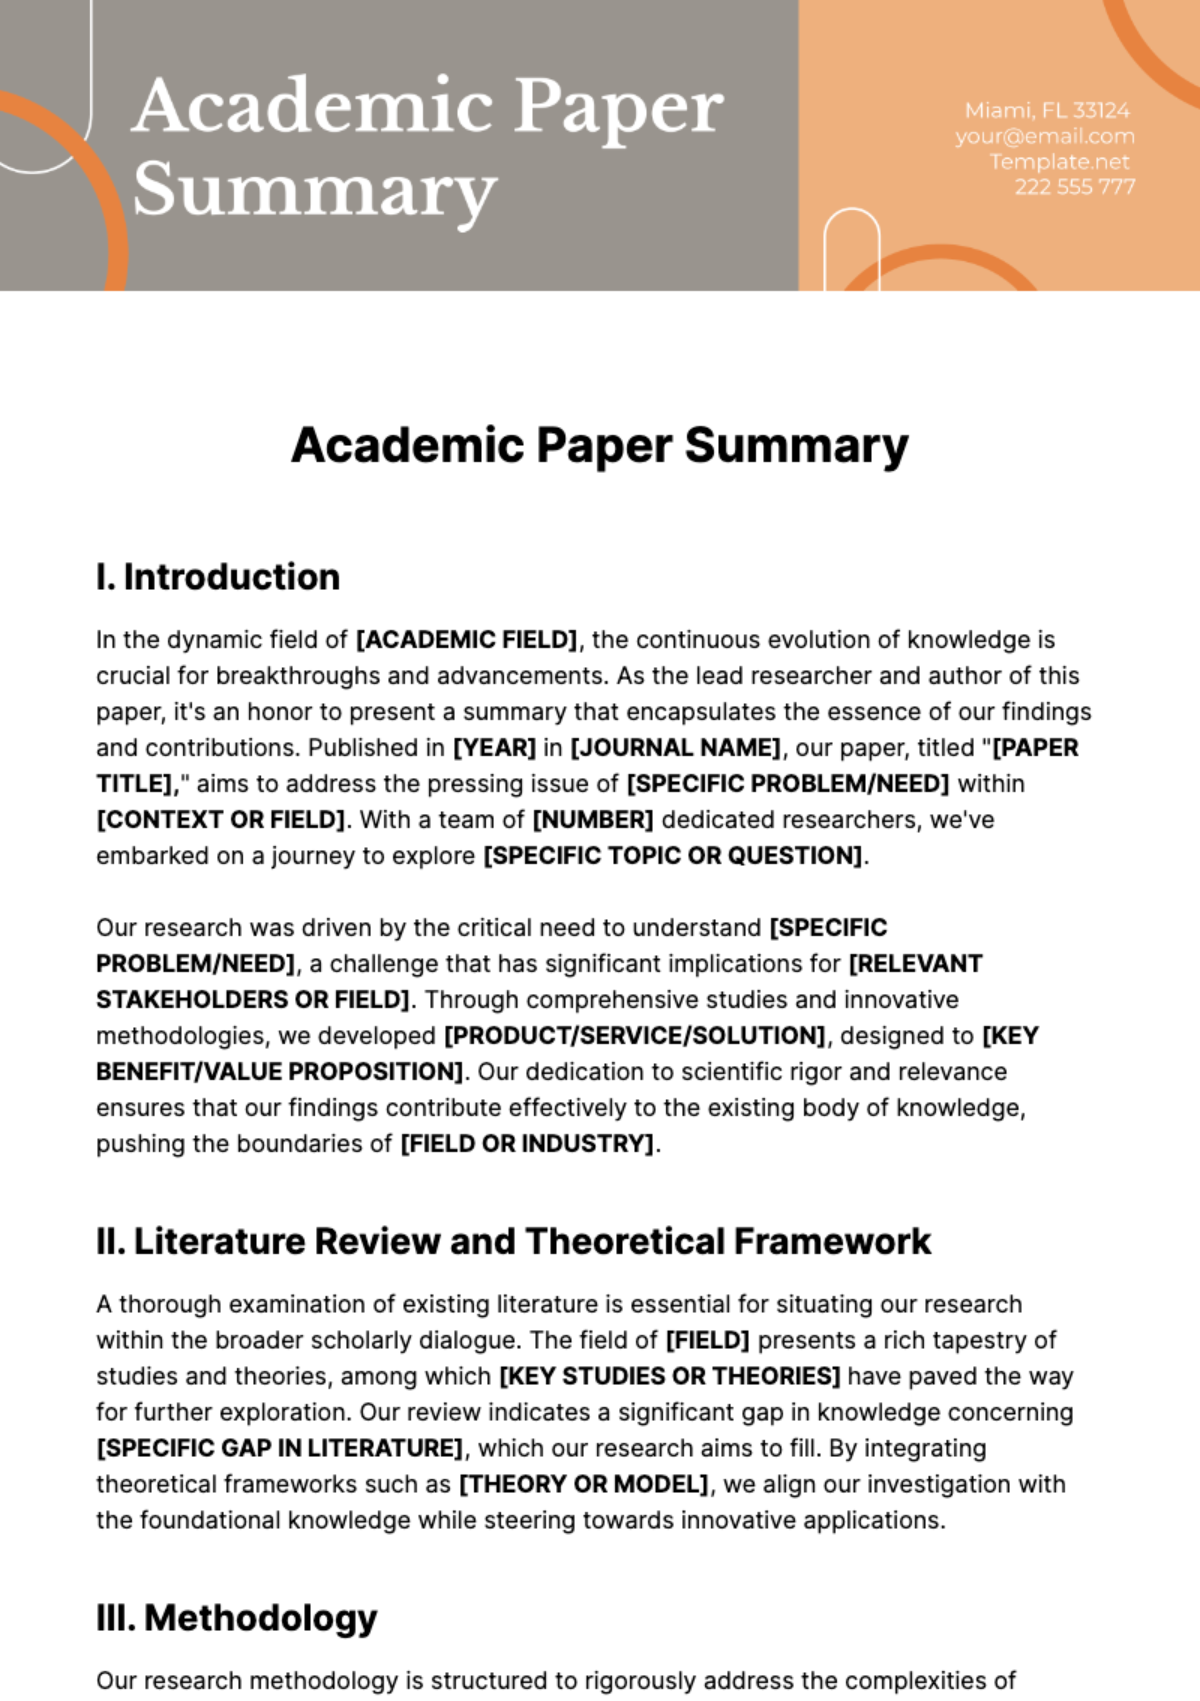 Academic Paper Summary Template